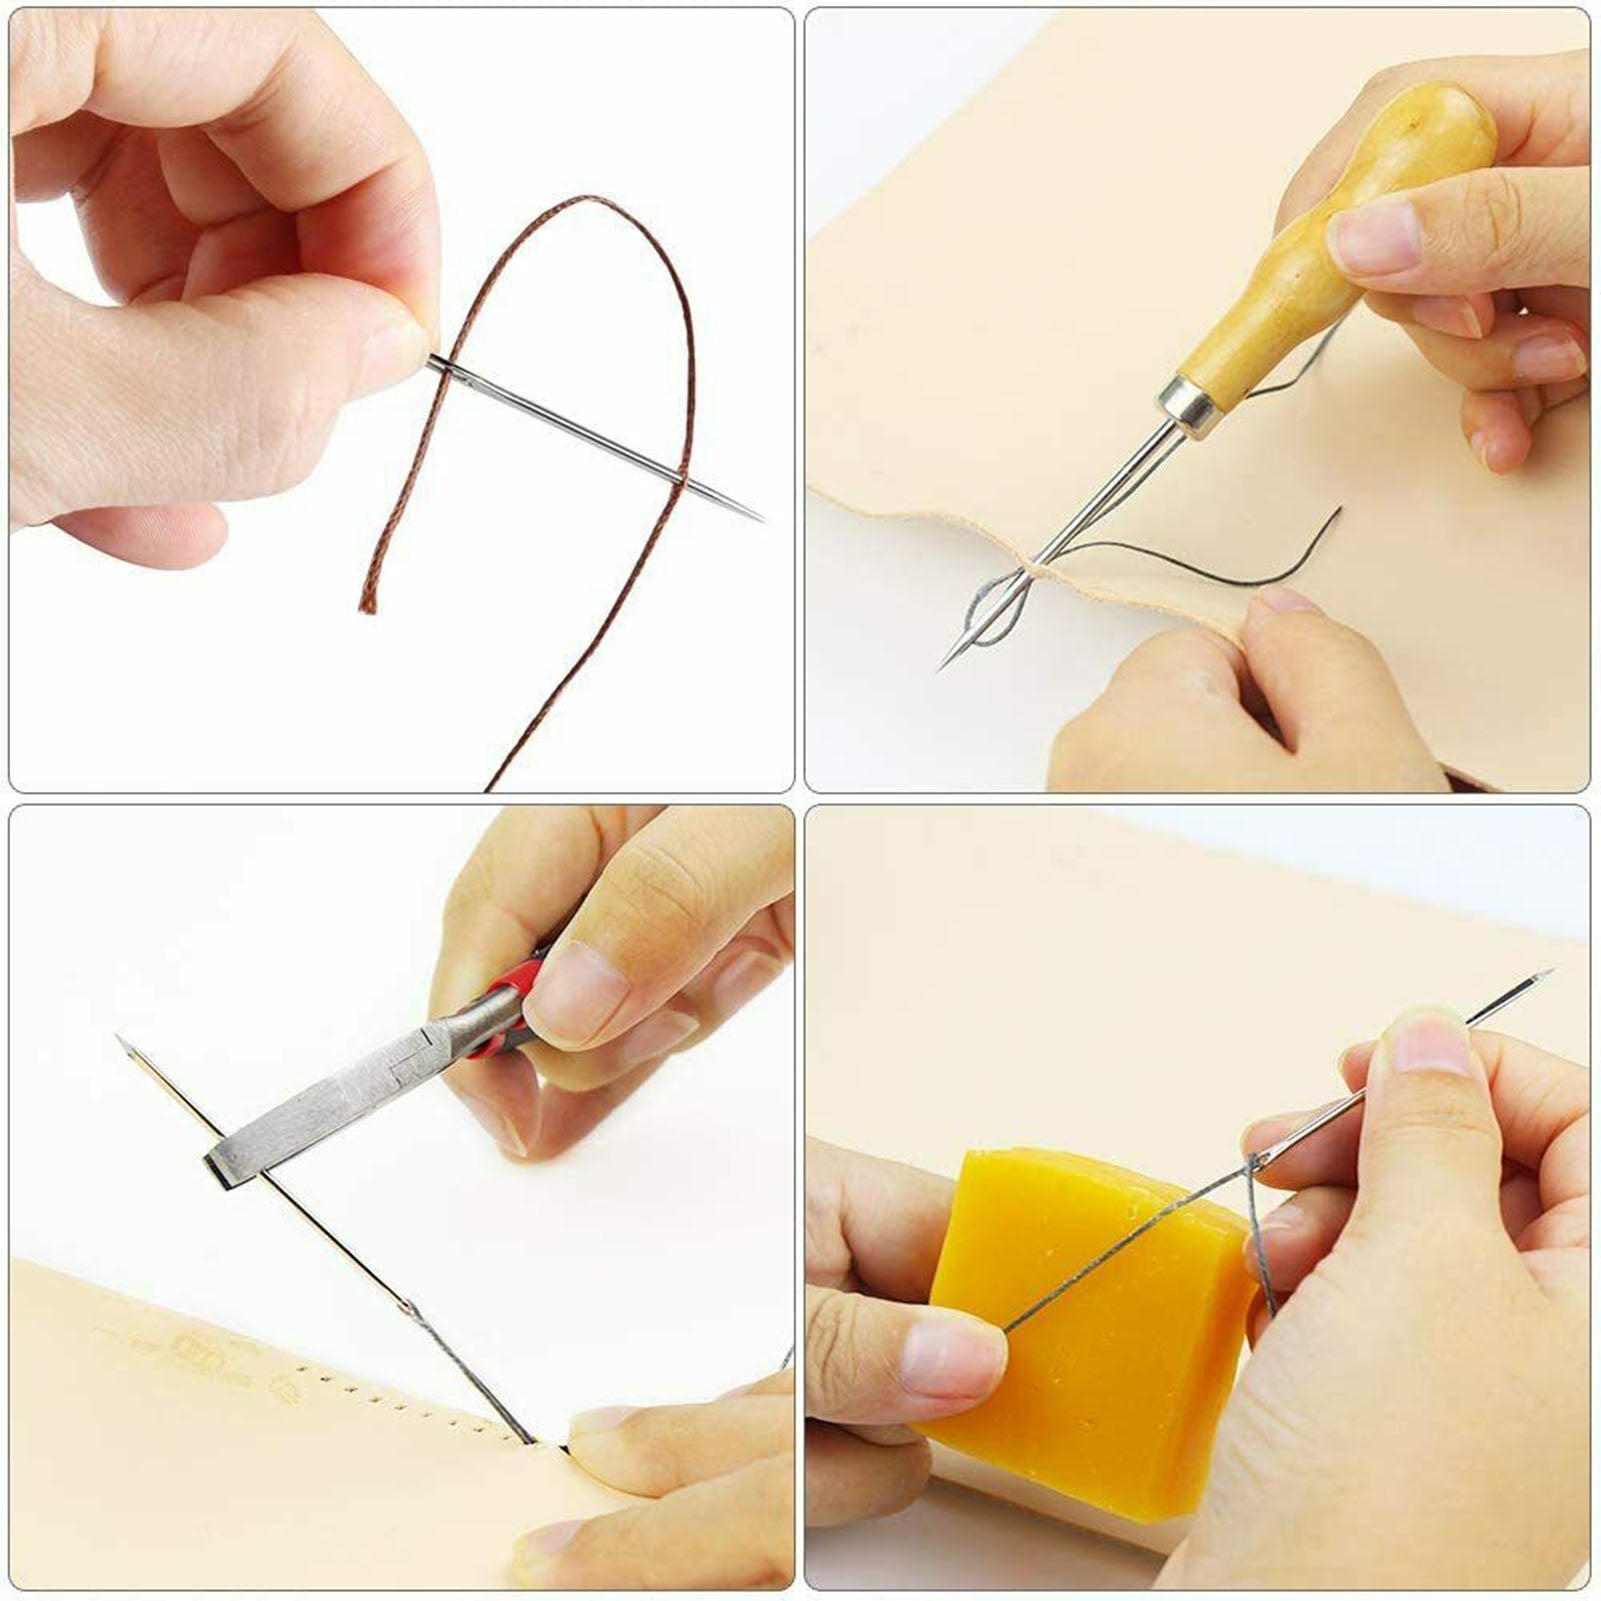 25pcs Leather Sewing Tools Diy Hand Stitching Kit With Groover Awl